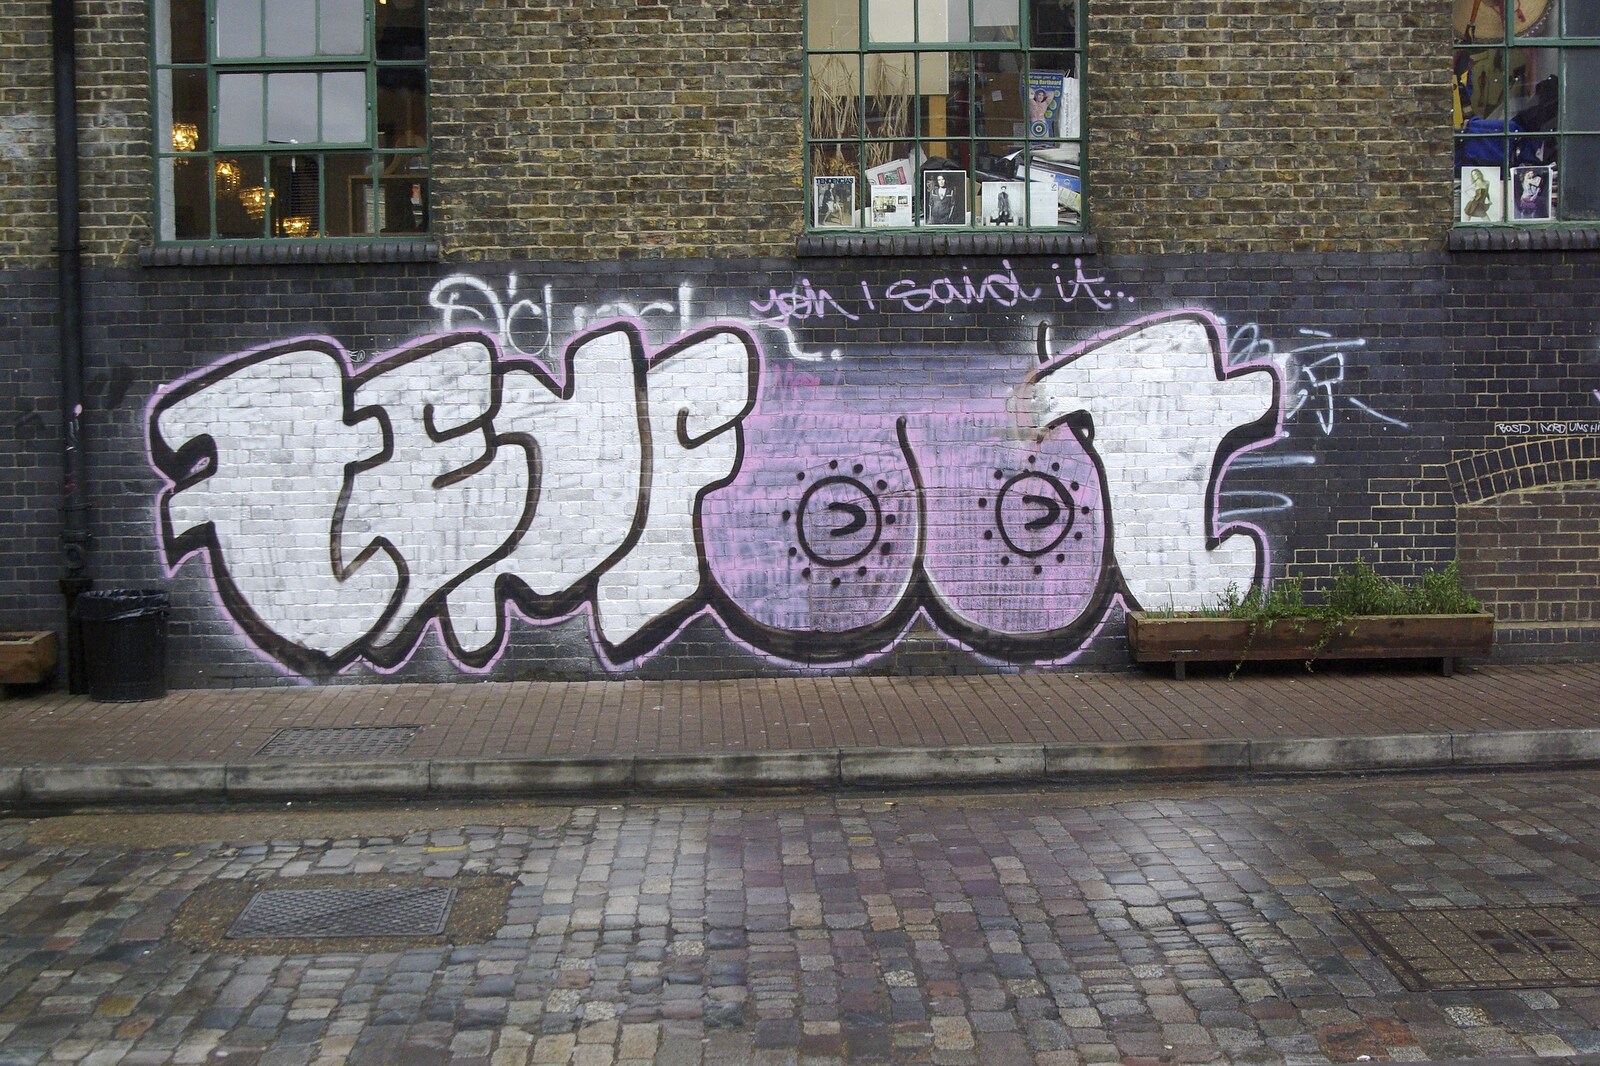 Tenfoot graffiti, featuring a couple of pink breasts from From East End to East Coast: Brick Lane and Walberswick, London and Suffolk - 9th February 2007